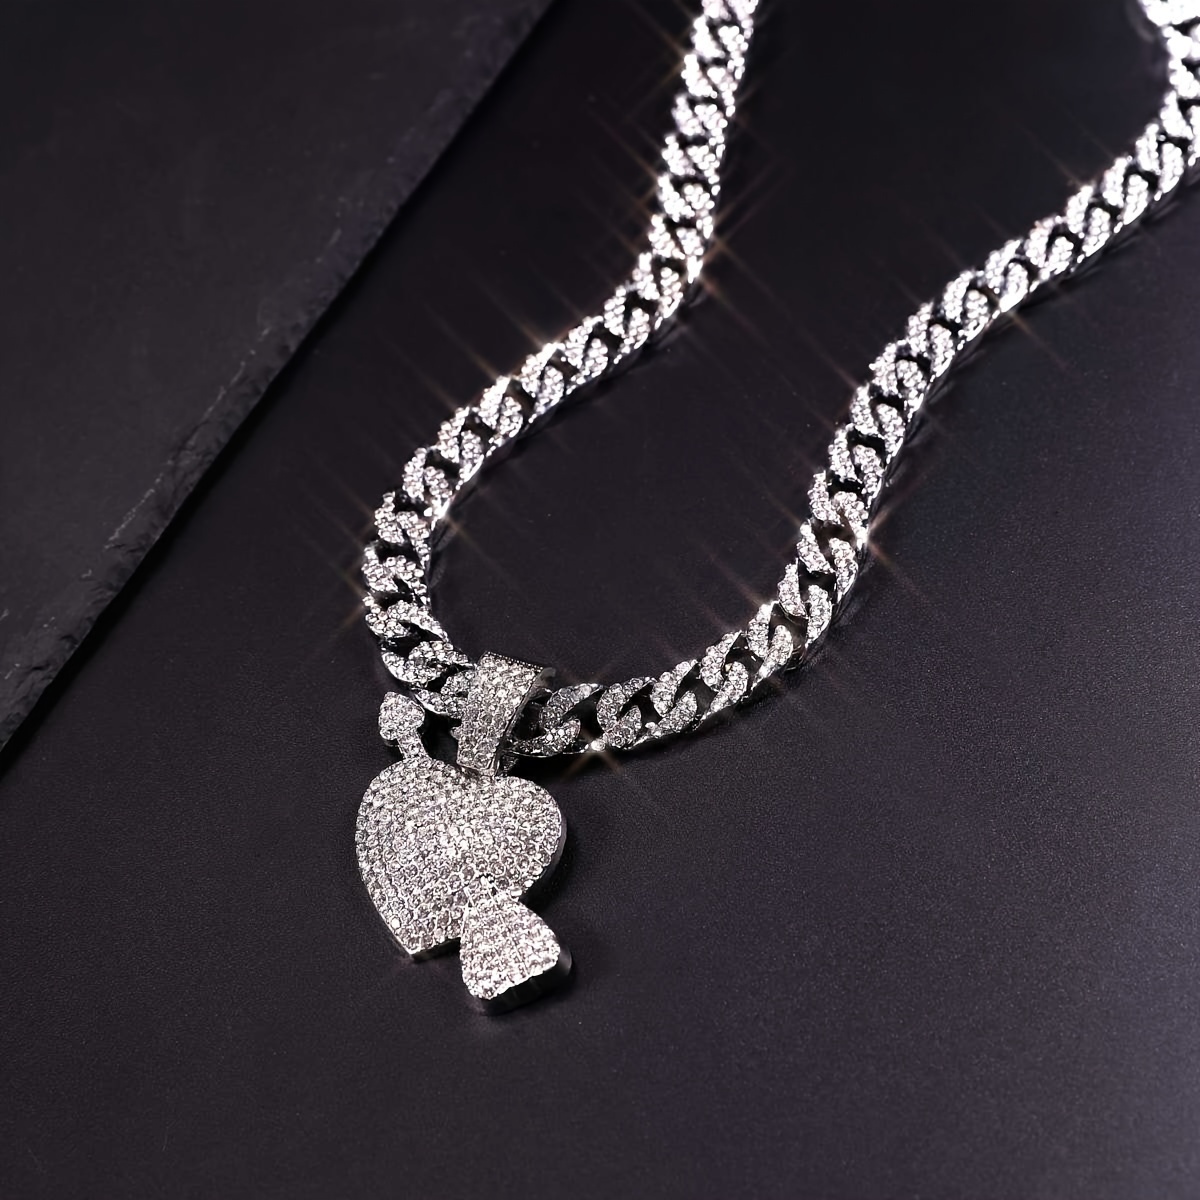 Sterling Silver Chain Link Necklace and Bracelet with Heart Charms -  9895340